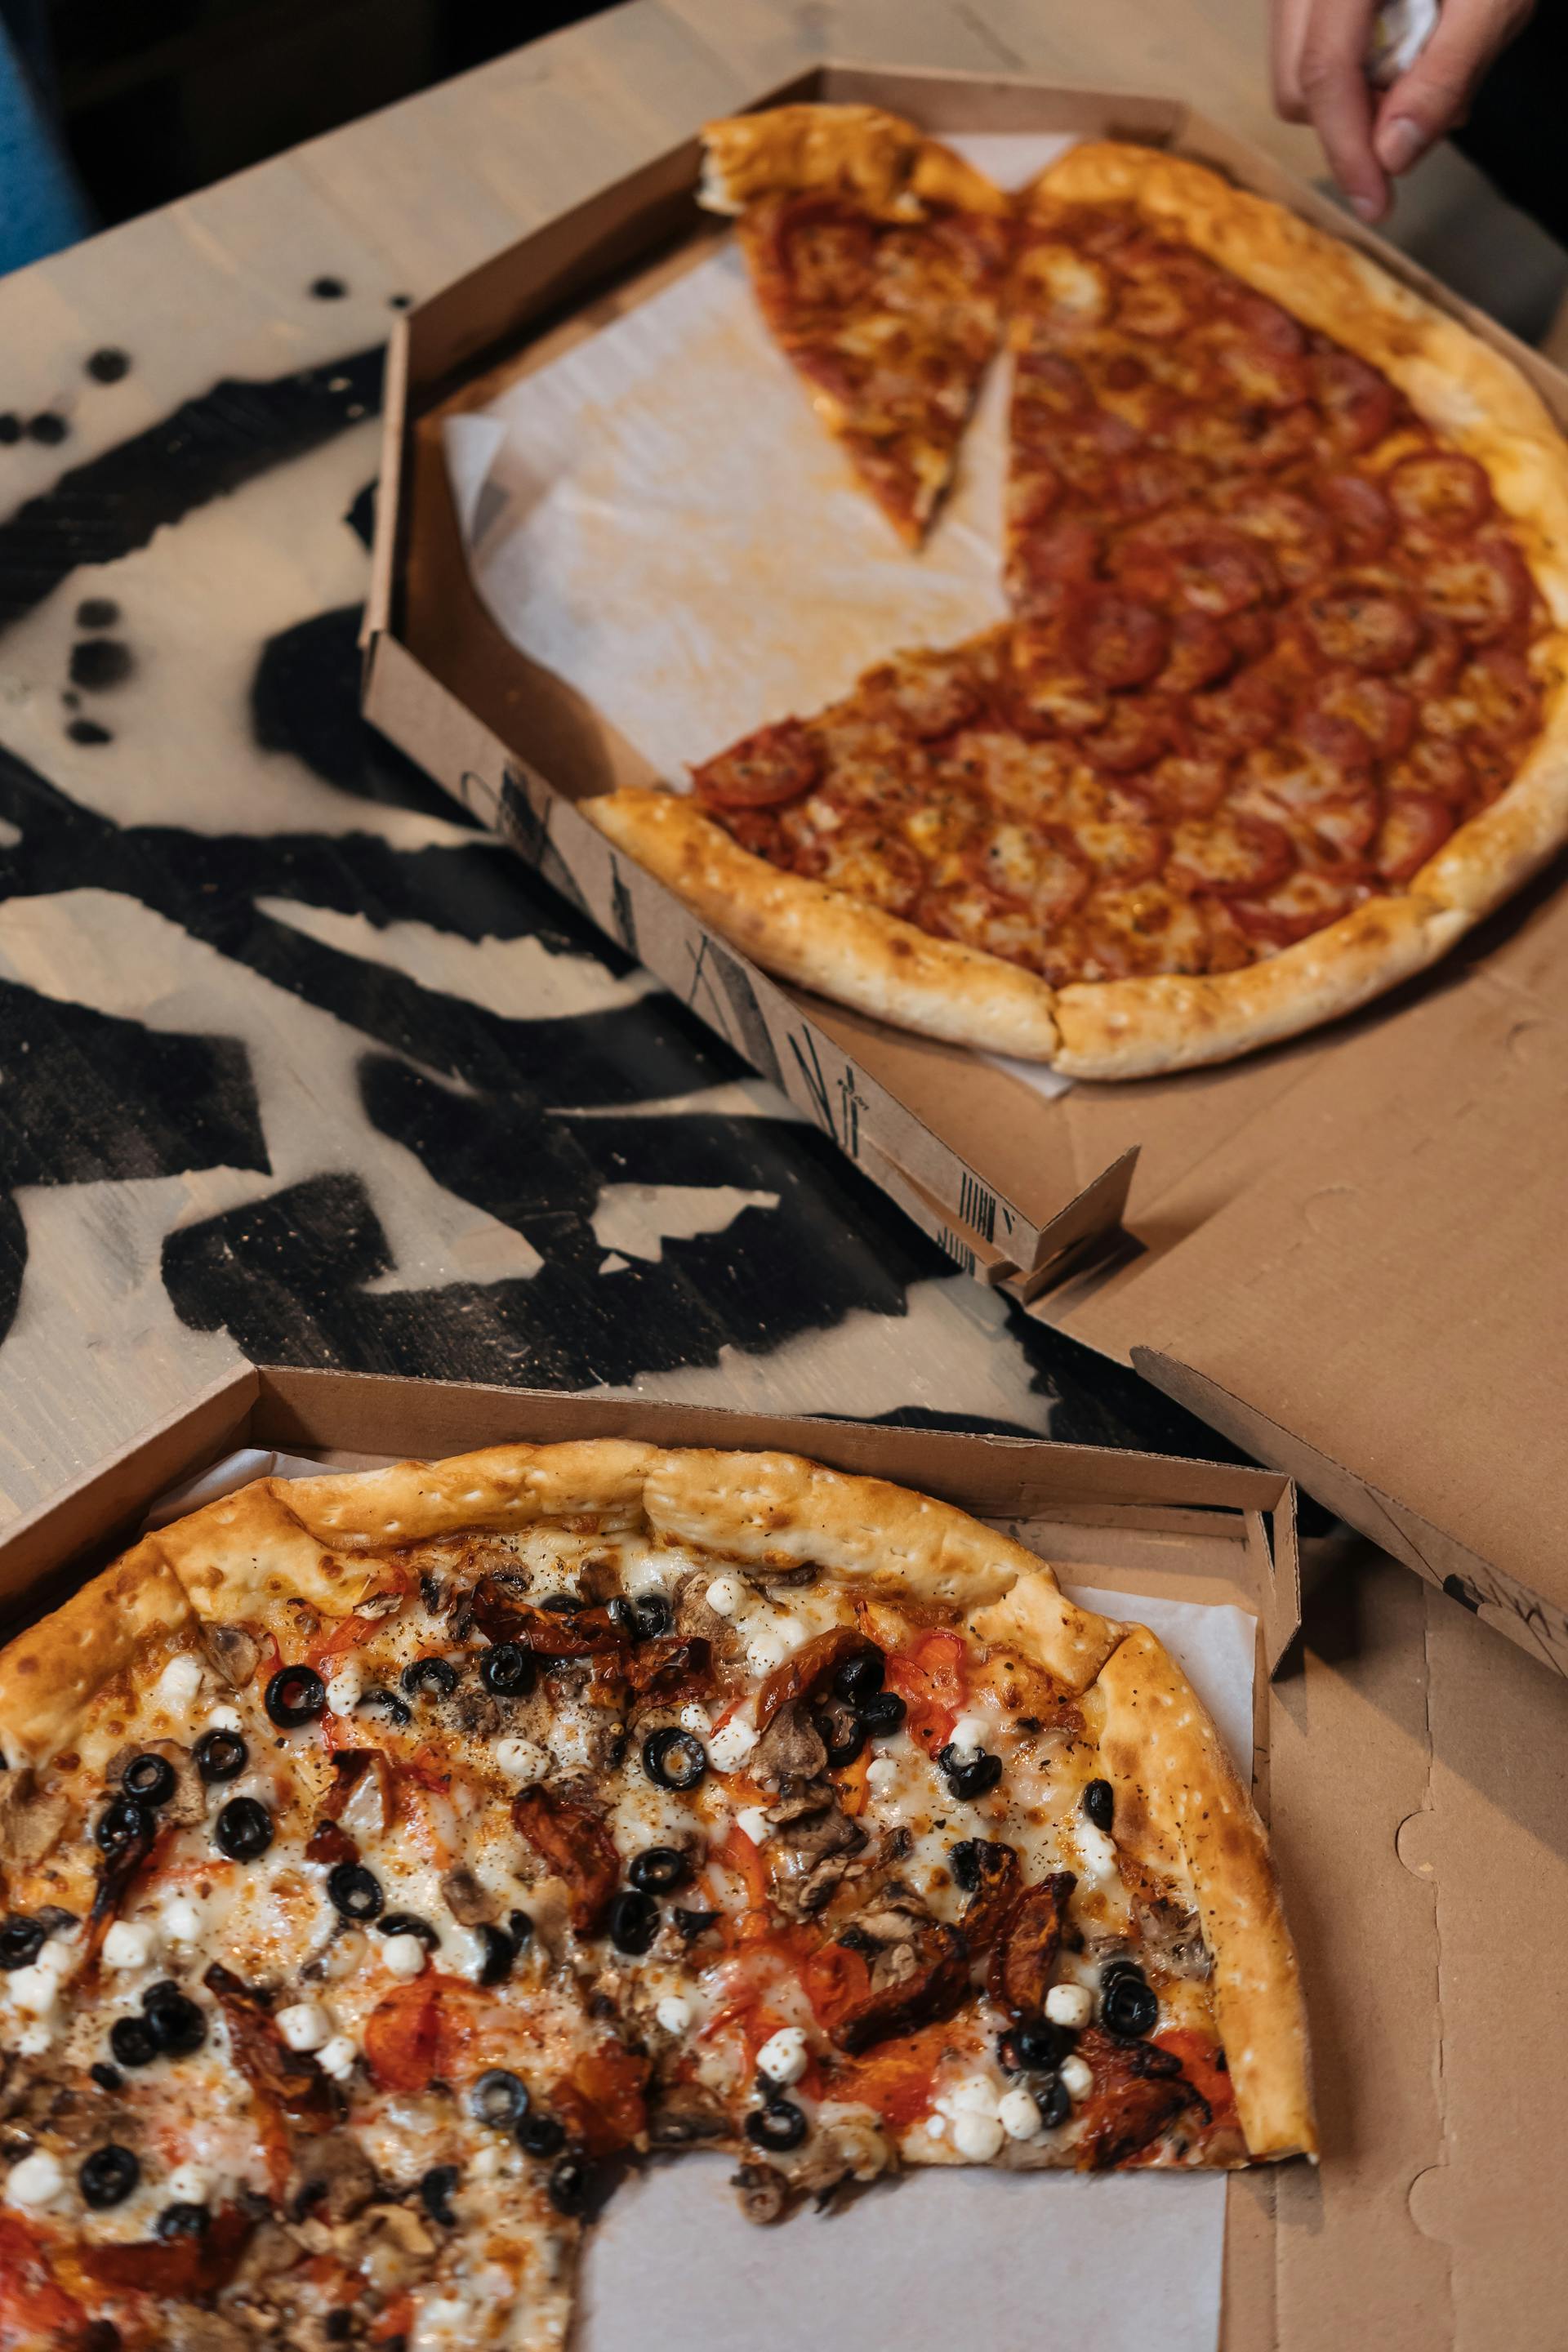 Boxes of pizza on a table | Source: Pexels